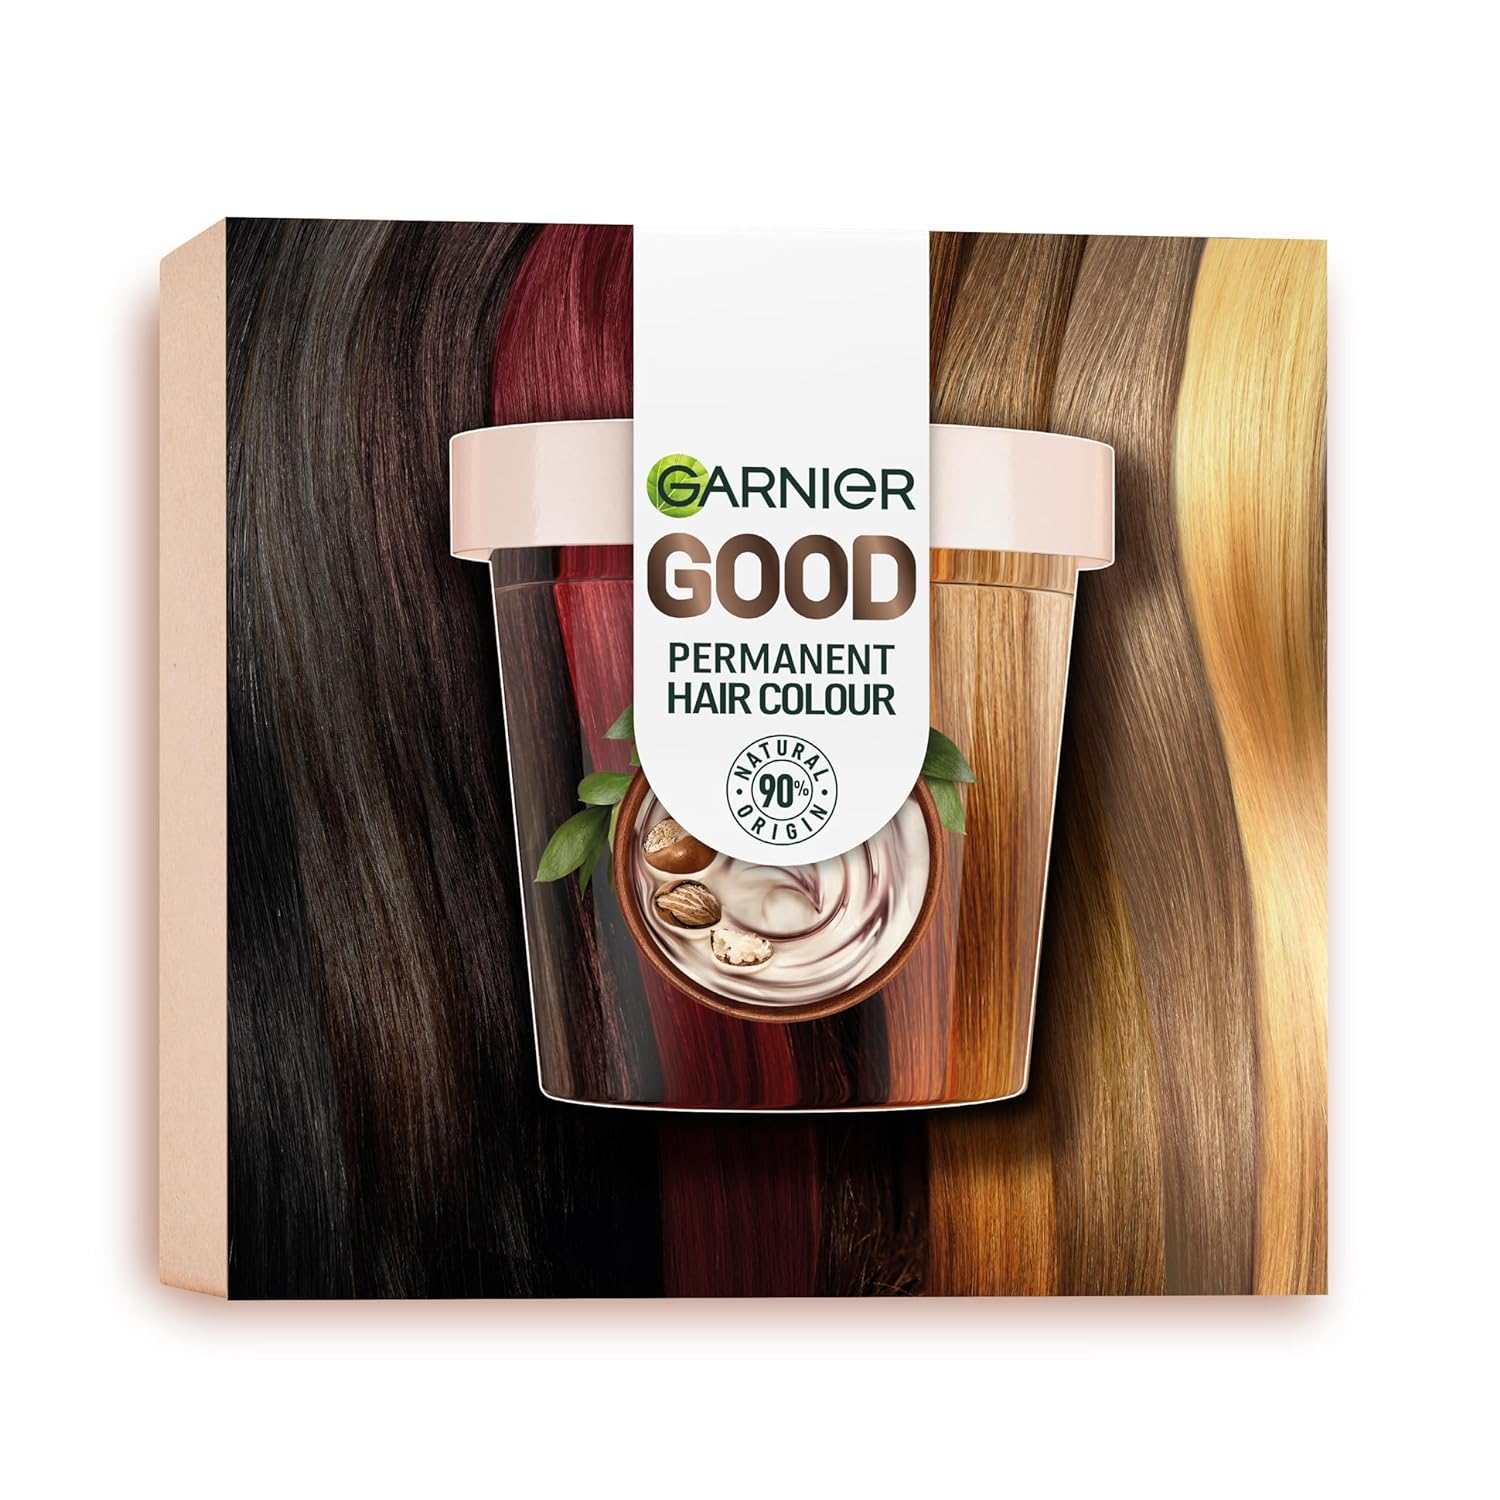 Garnier Permanent Hair Colour, Hard Dye Set for Intense and Long-Lasting Hair Colour, Colouration for up to 8 Weeks of Radiant Colour, No Ammonia, 8.0 Honey Blonde, Good Starter Set